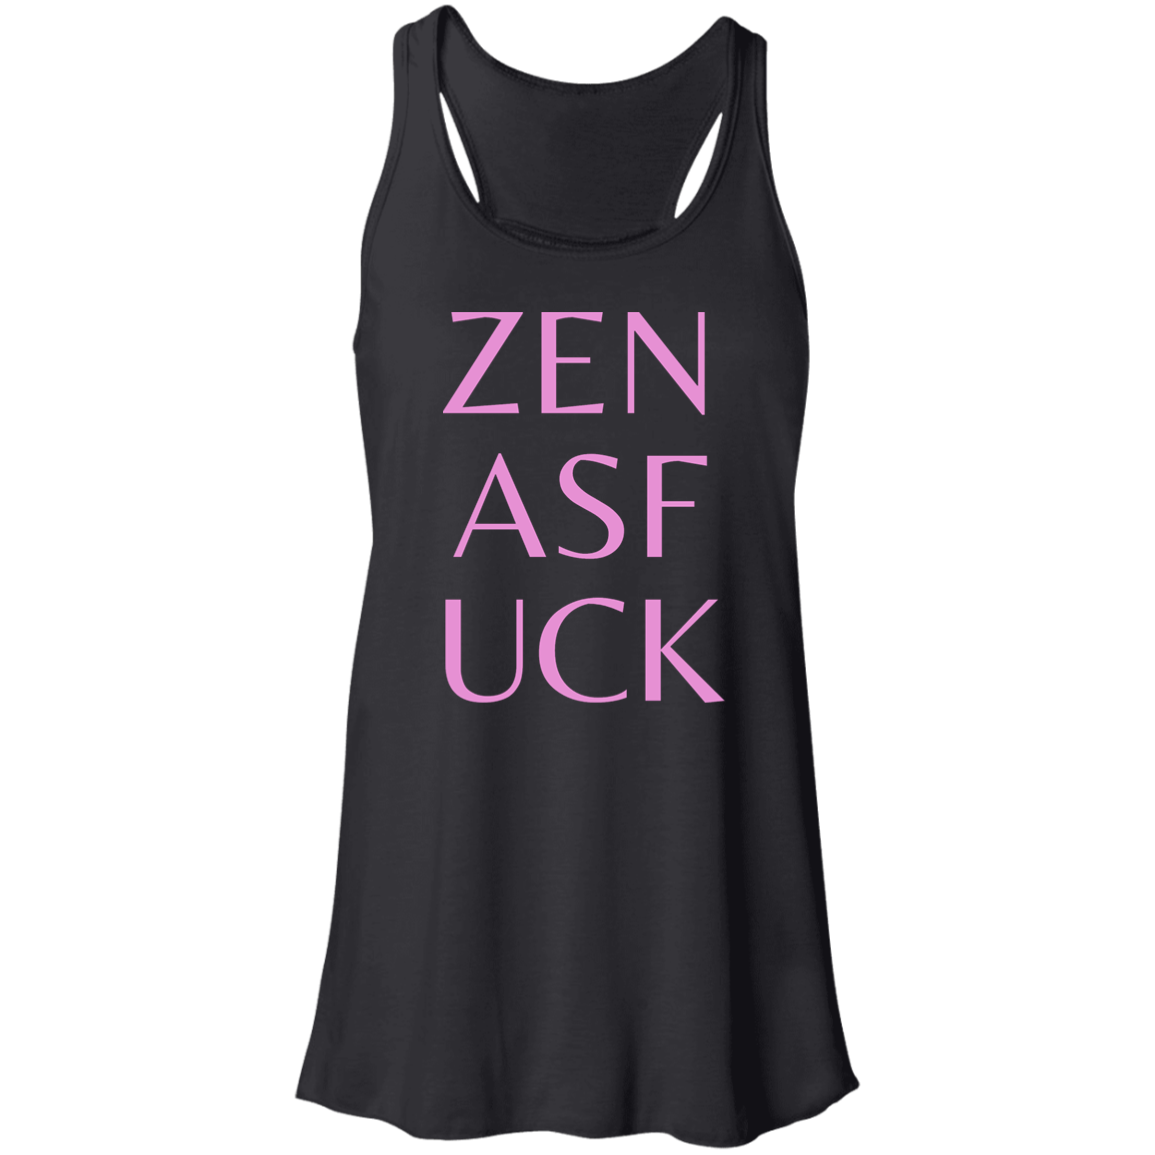 ZEN ASF UCK T SHIRT (PlaceIt) (11.41 × 15.11 in) (3) - Thoughtful Blossom